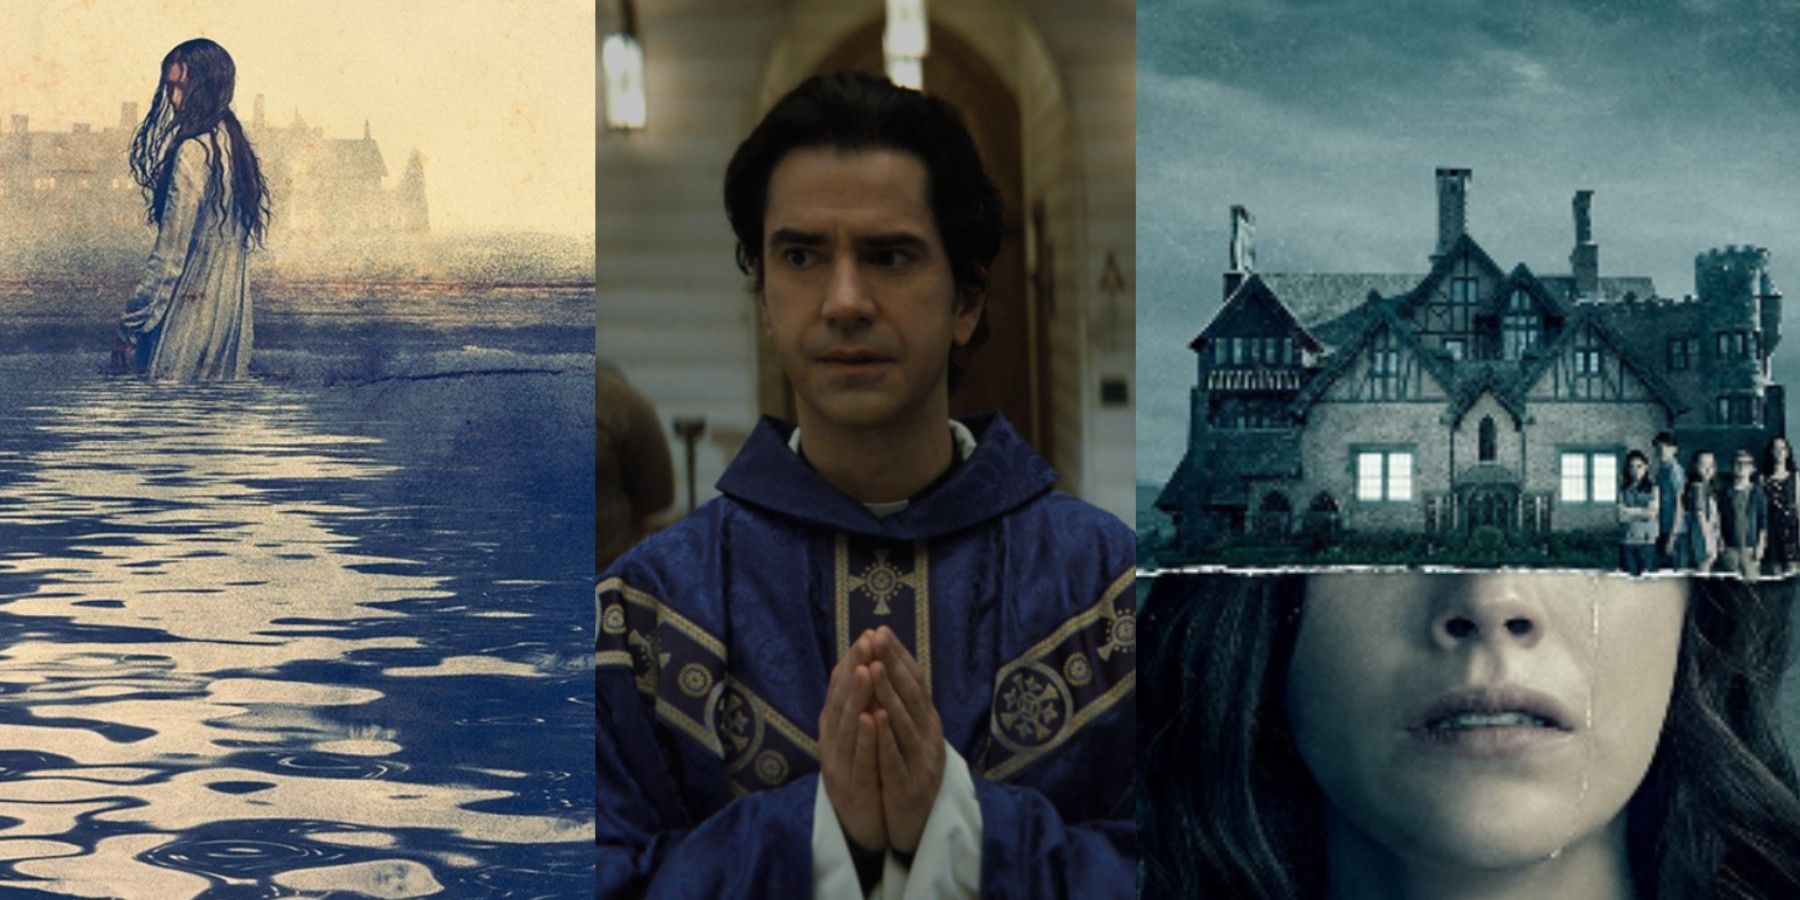 The Haunting of Bly Manor, Midnight Mass, and The Haunting of Hill House